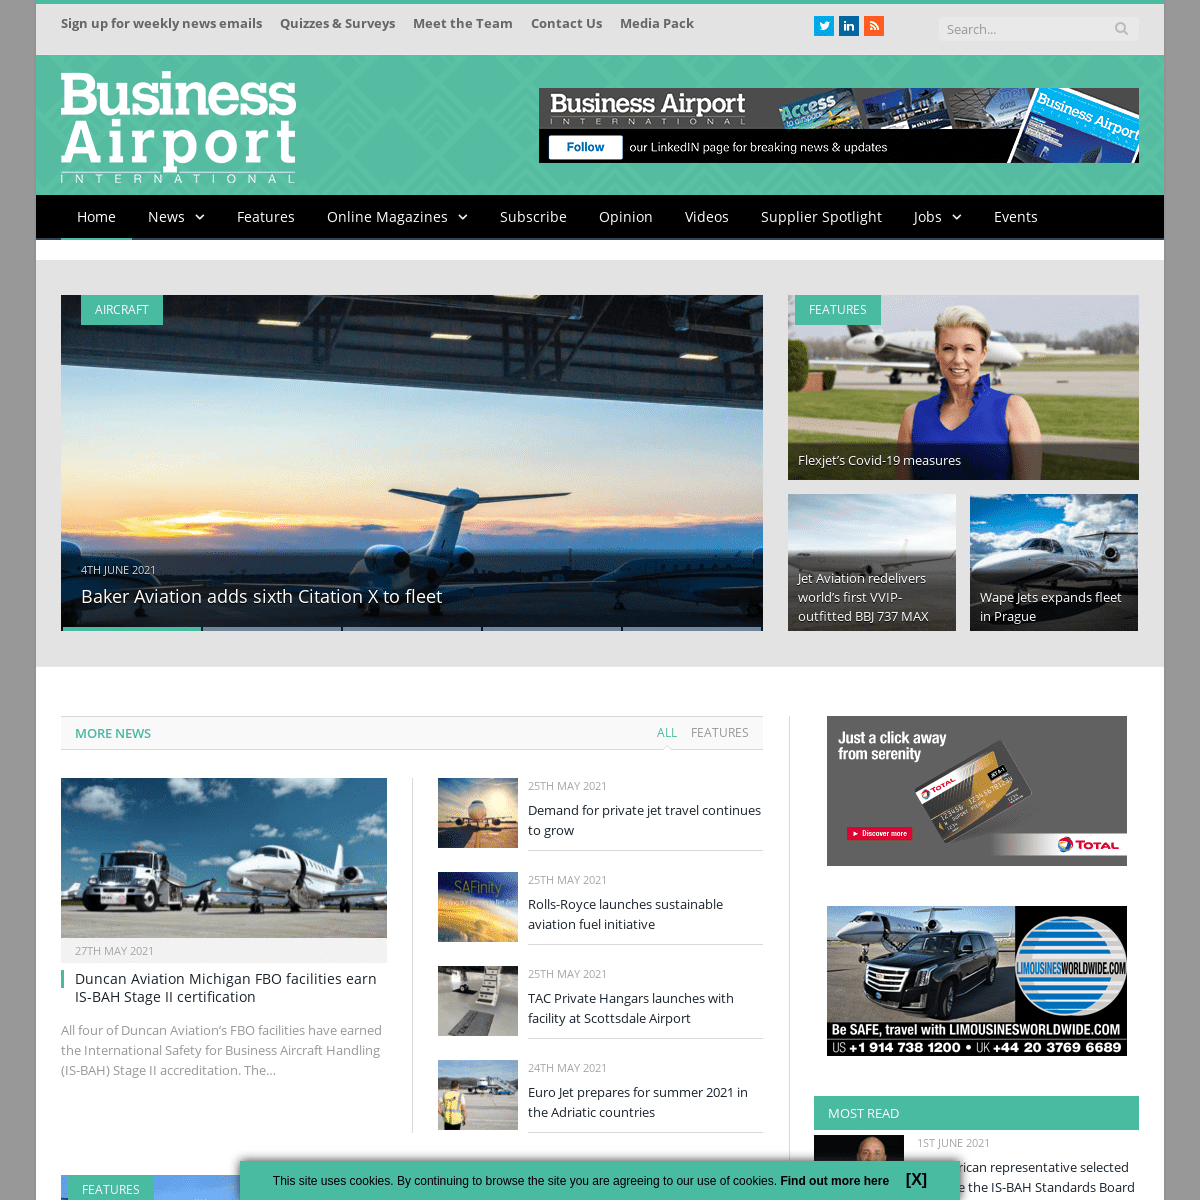 A complete backup of https://businessairportinternational.com